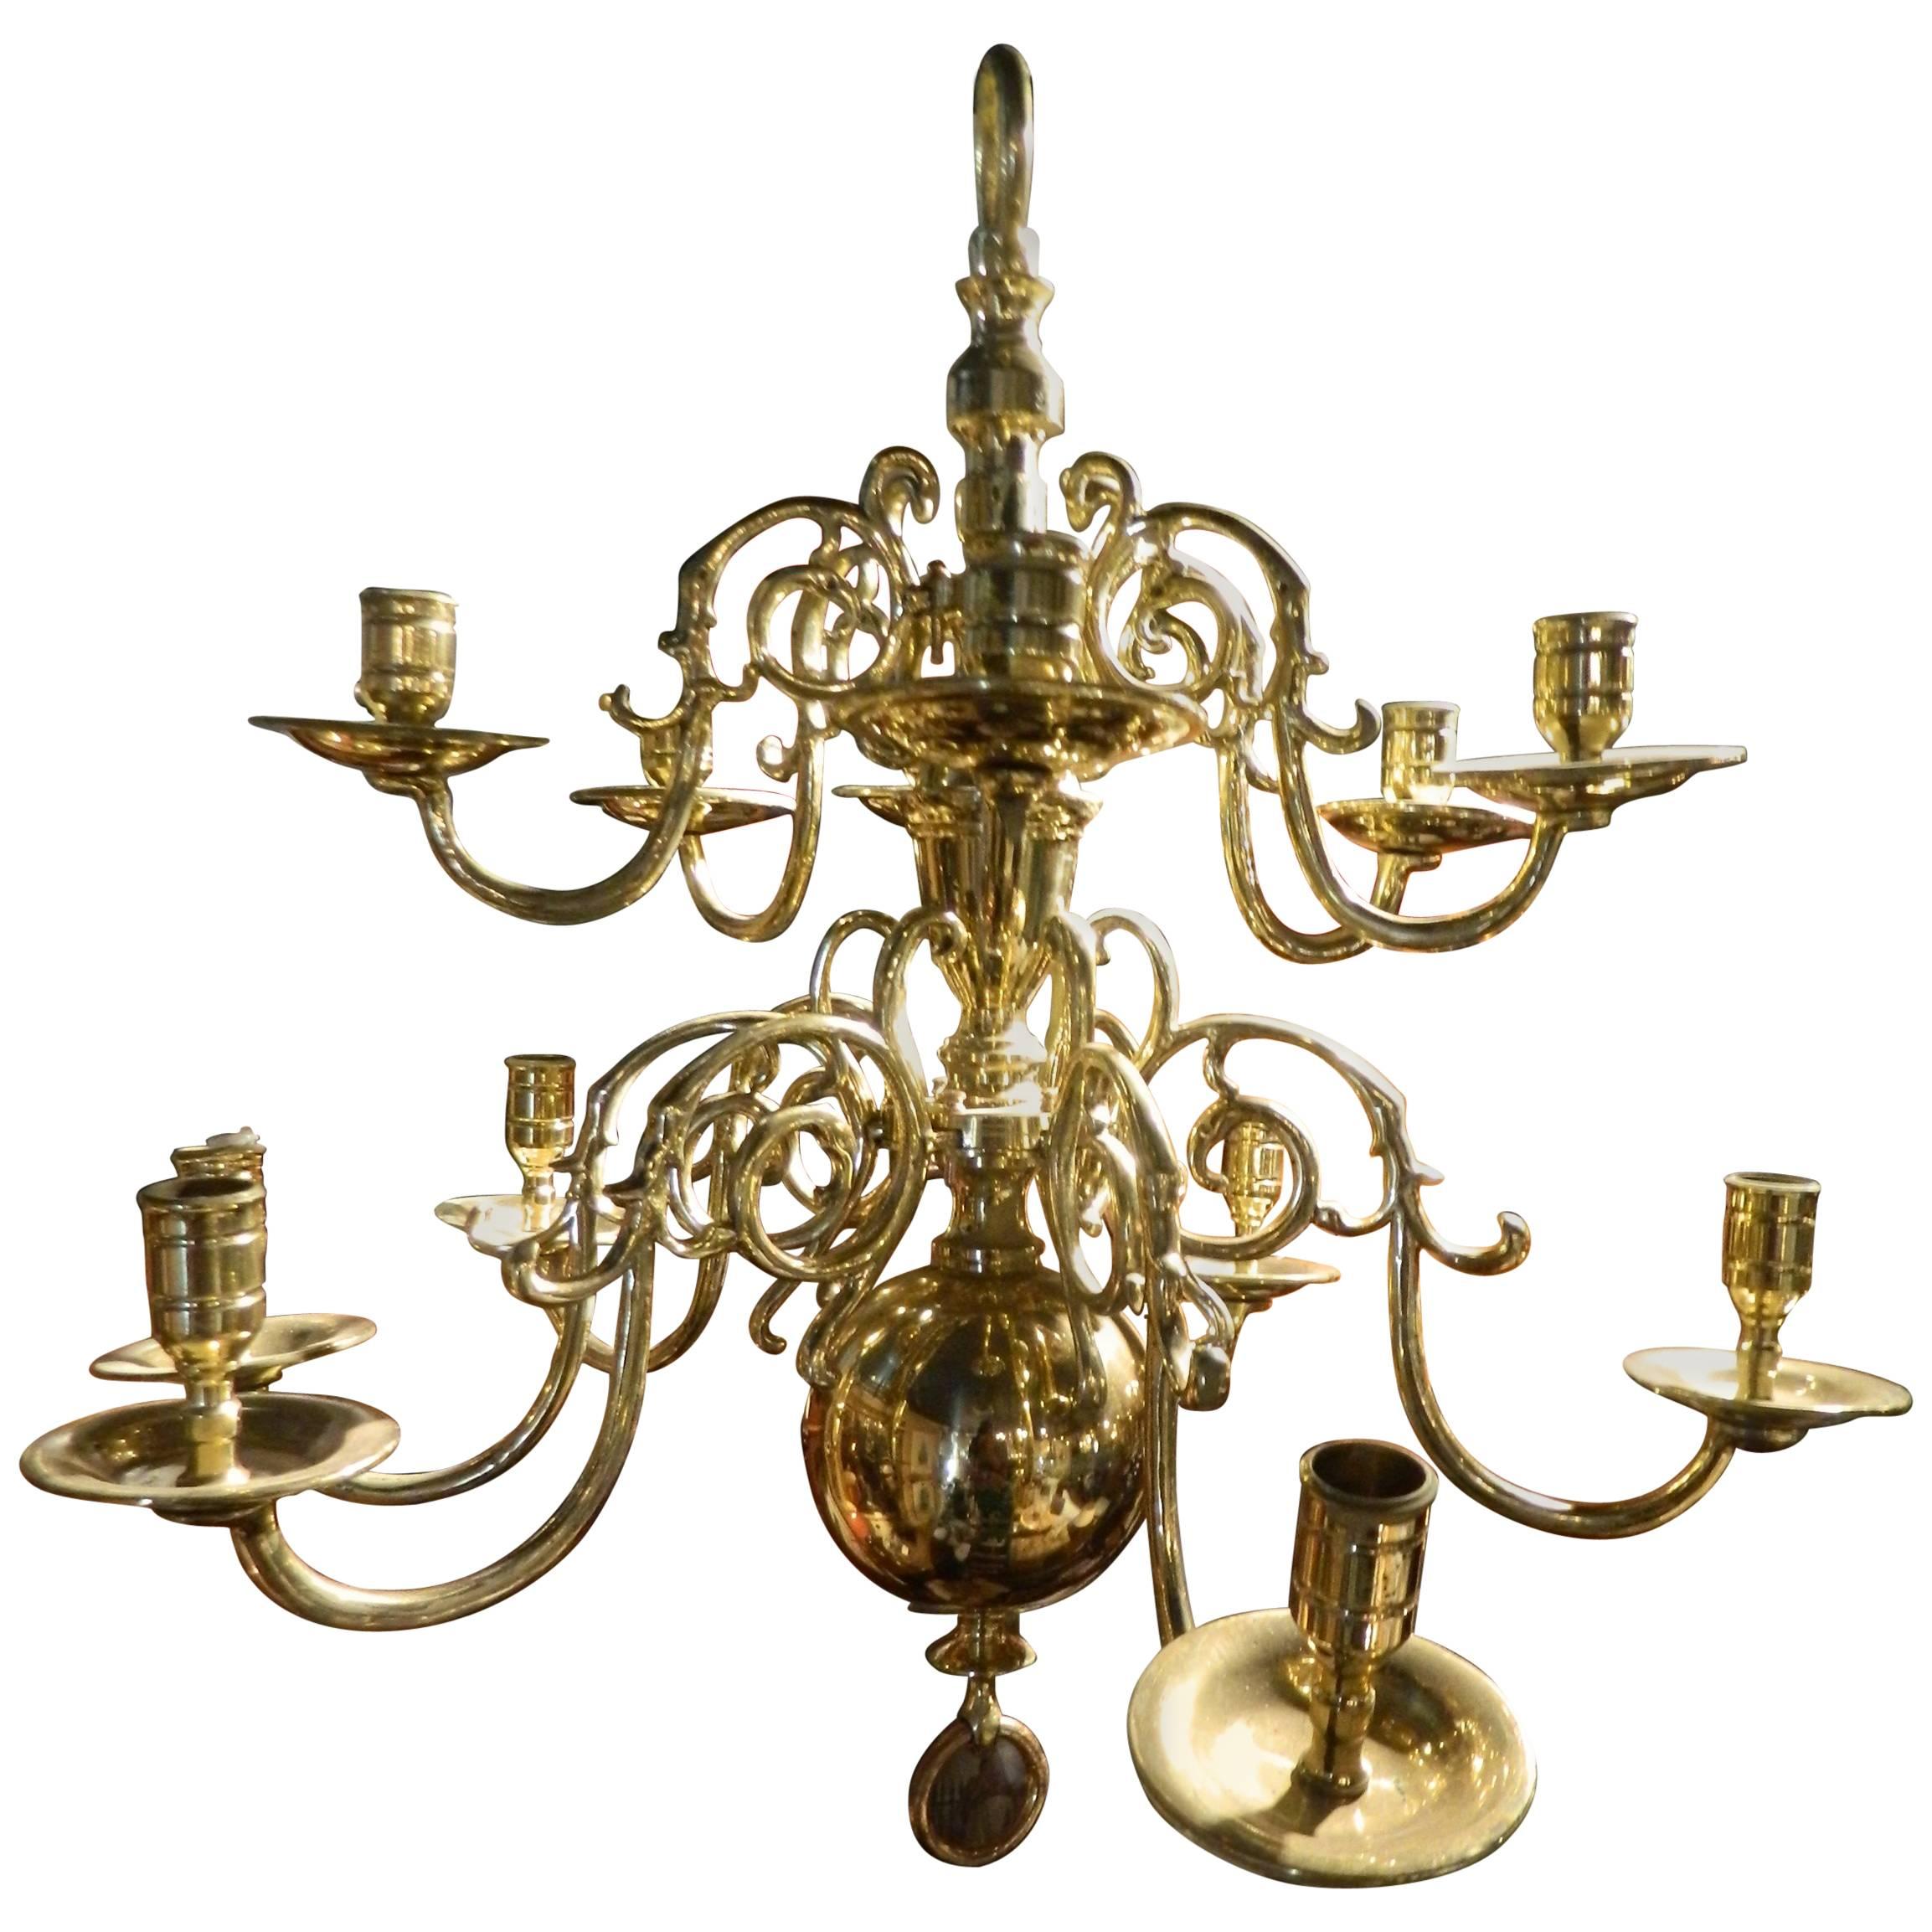 French Polished Brass Two-Tier Ball Chandelier, 19th Century